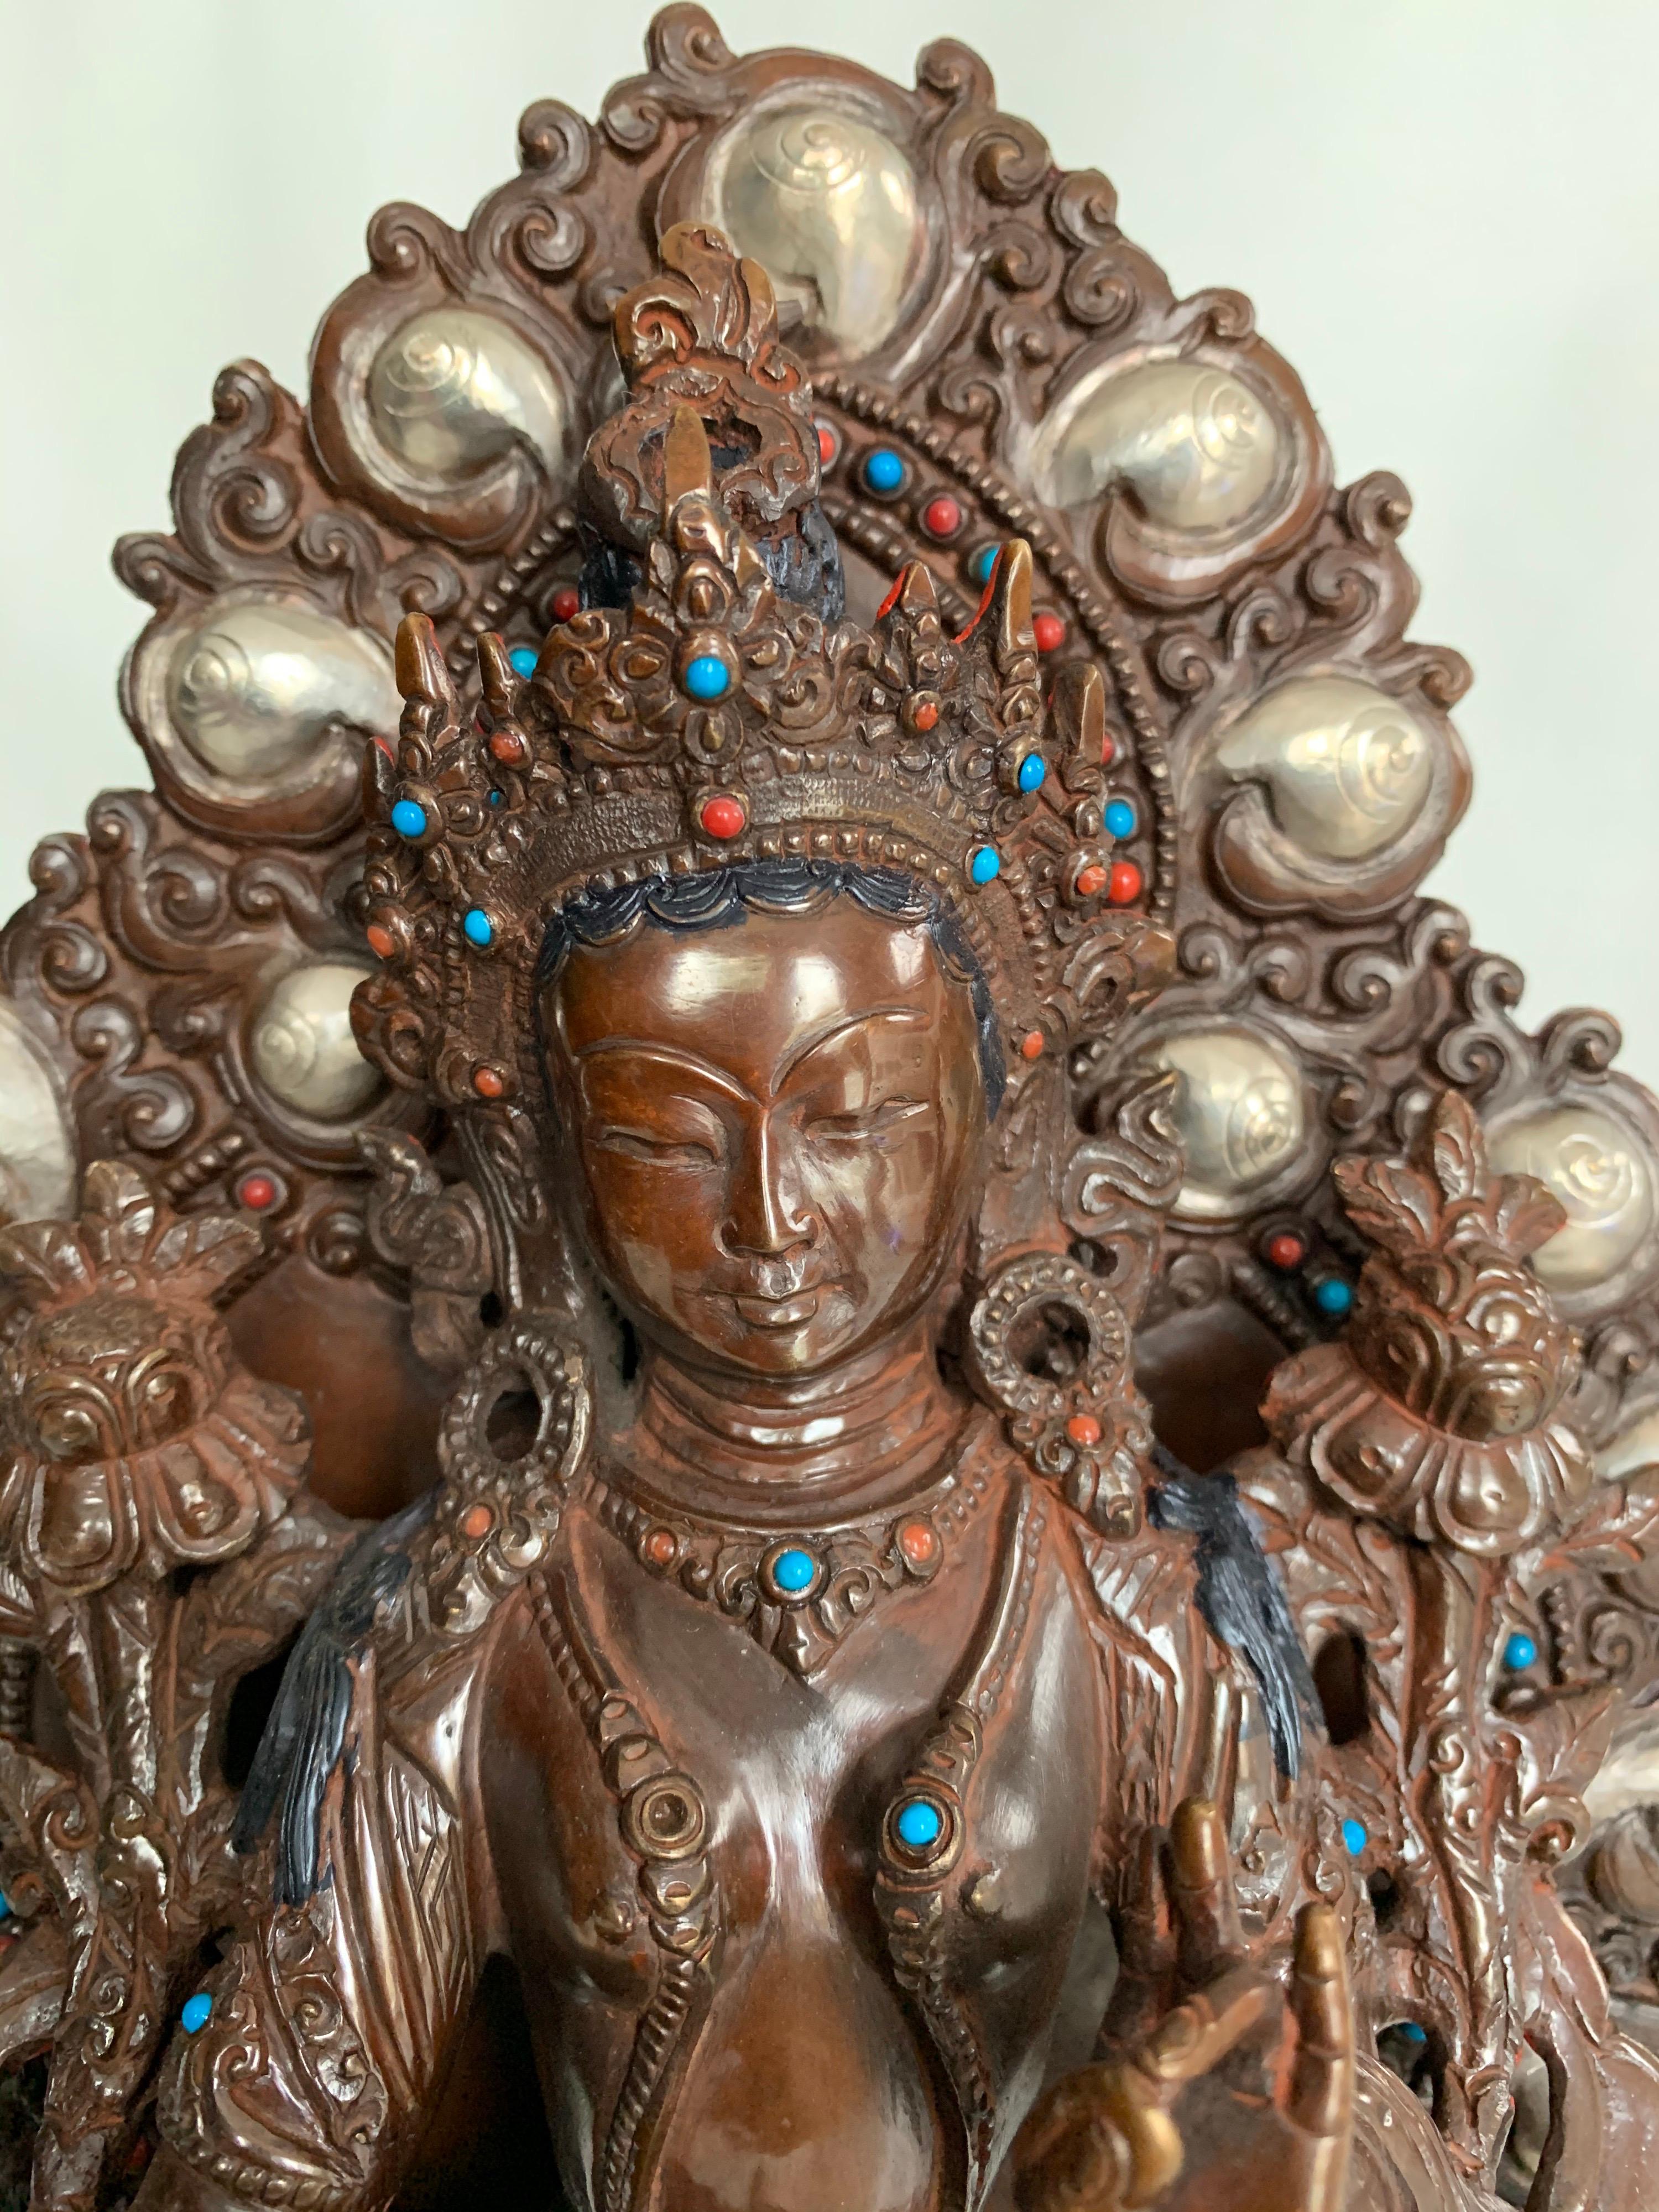 Green Tara Statue 10 Inch with Silver Handcrafted by Lost Wax Process - Other Art Style Sculpture by Unknown